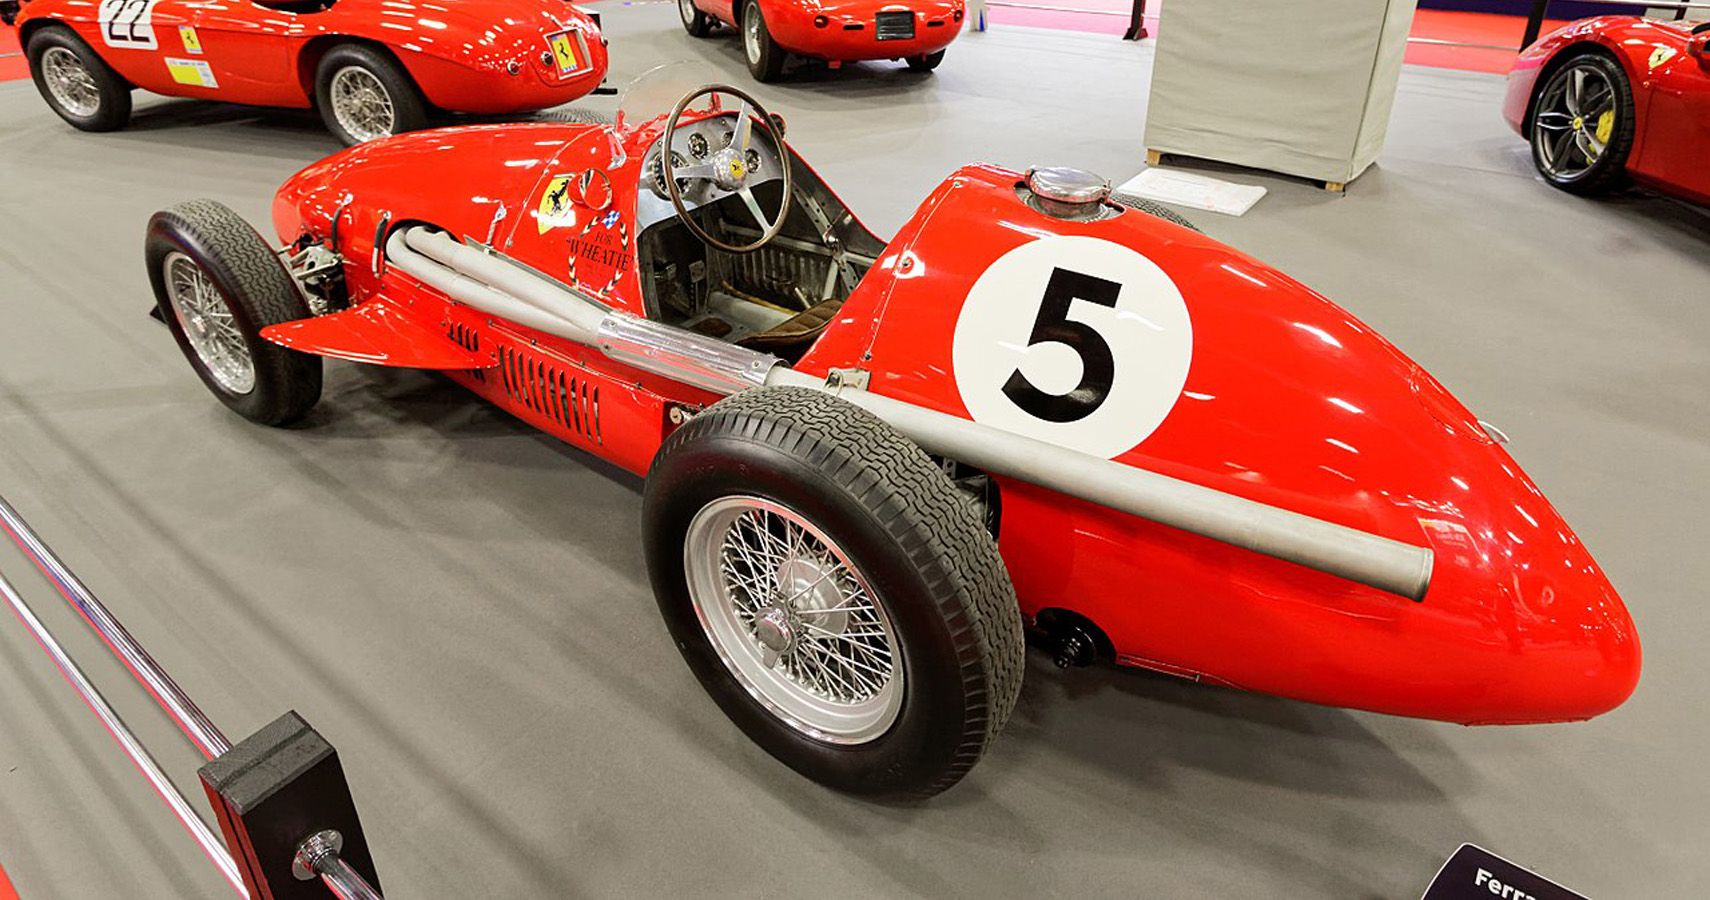 The Ferrari 500F2's Engine Was A Very Simple Inline-Four Twin-Cam One That Had Two Spark Plugs Per Cylinder, Eight In All, For A Total Of 175 Horses